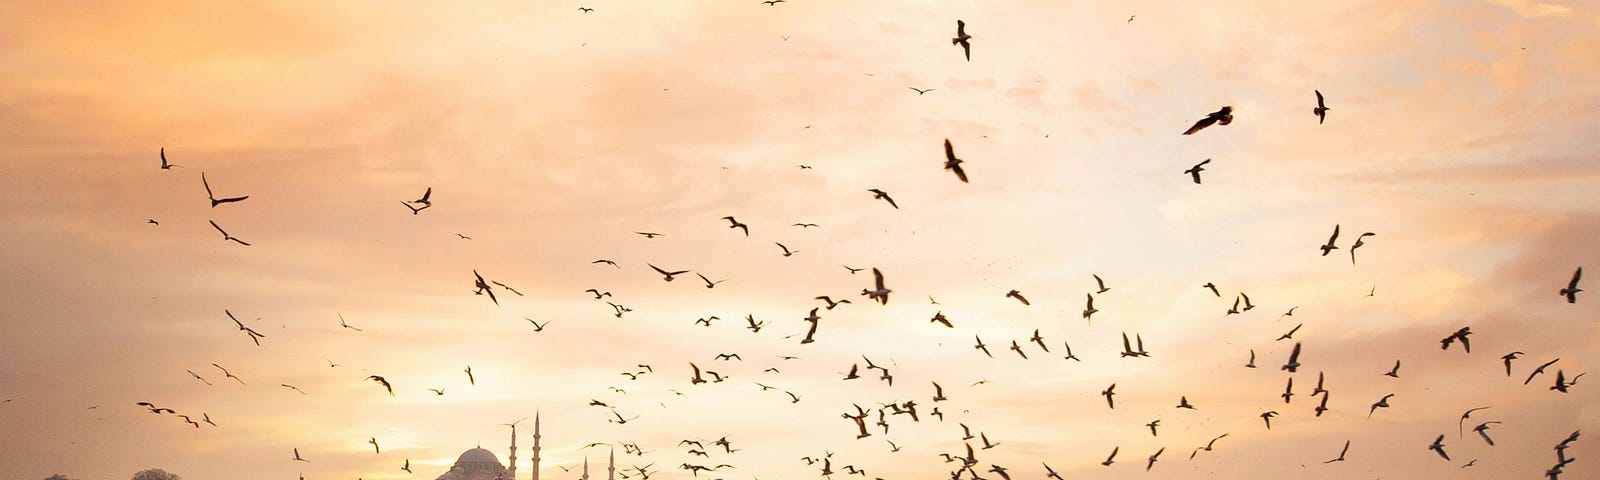 A landscape view of Eminonu, Istanbul at sunset with a colony of seagulls.